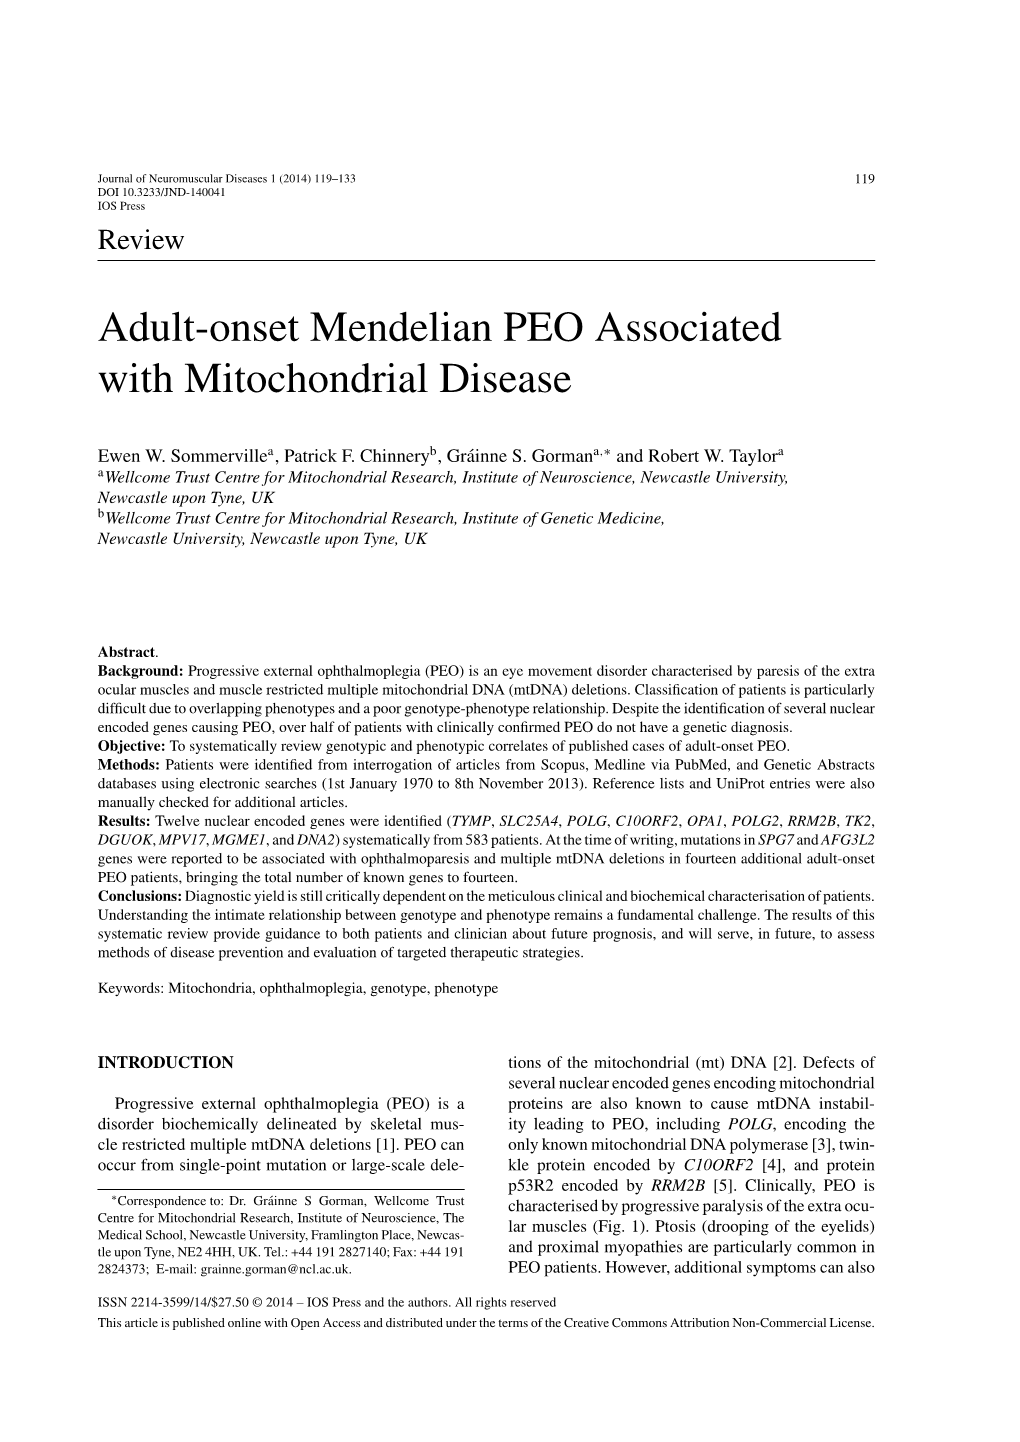 Adult-Onset Mendelian PEO Associated with Mitochondrial Disease